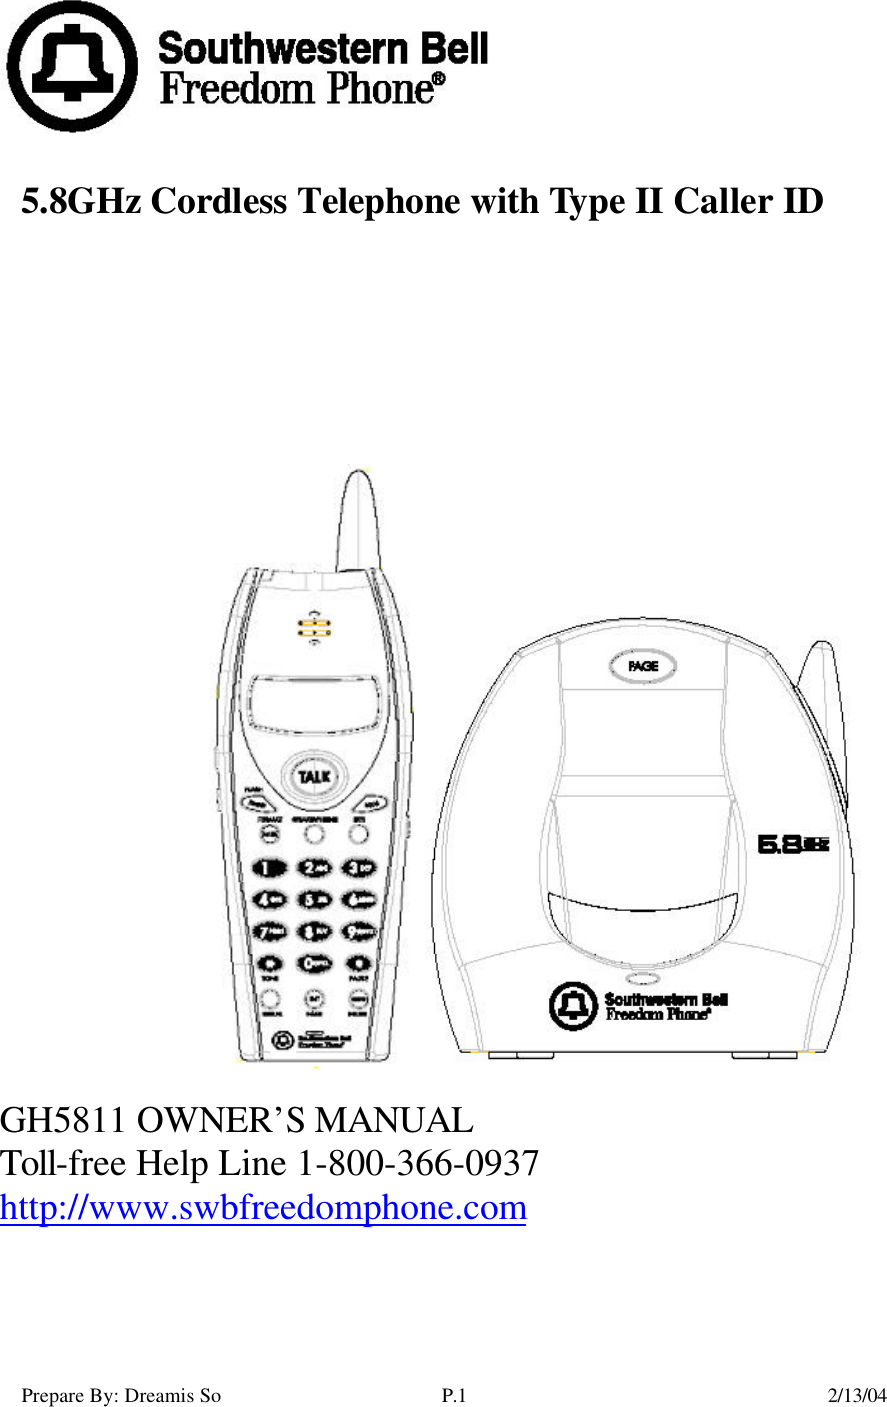 Prepare By: Dreamis So P.1    2/13/04        5.8GHz Cordless Telephone with Type II Caller ID    GH5811 OWNER’S MANUAL Toll-free Help Line 1-800-366-0937 http://www.swbfreedomphone.com   